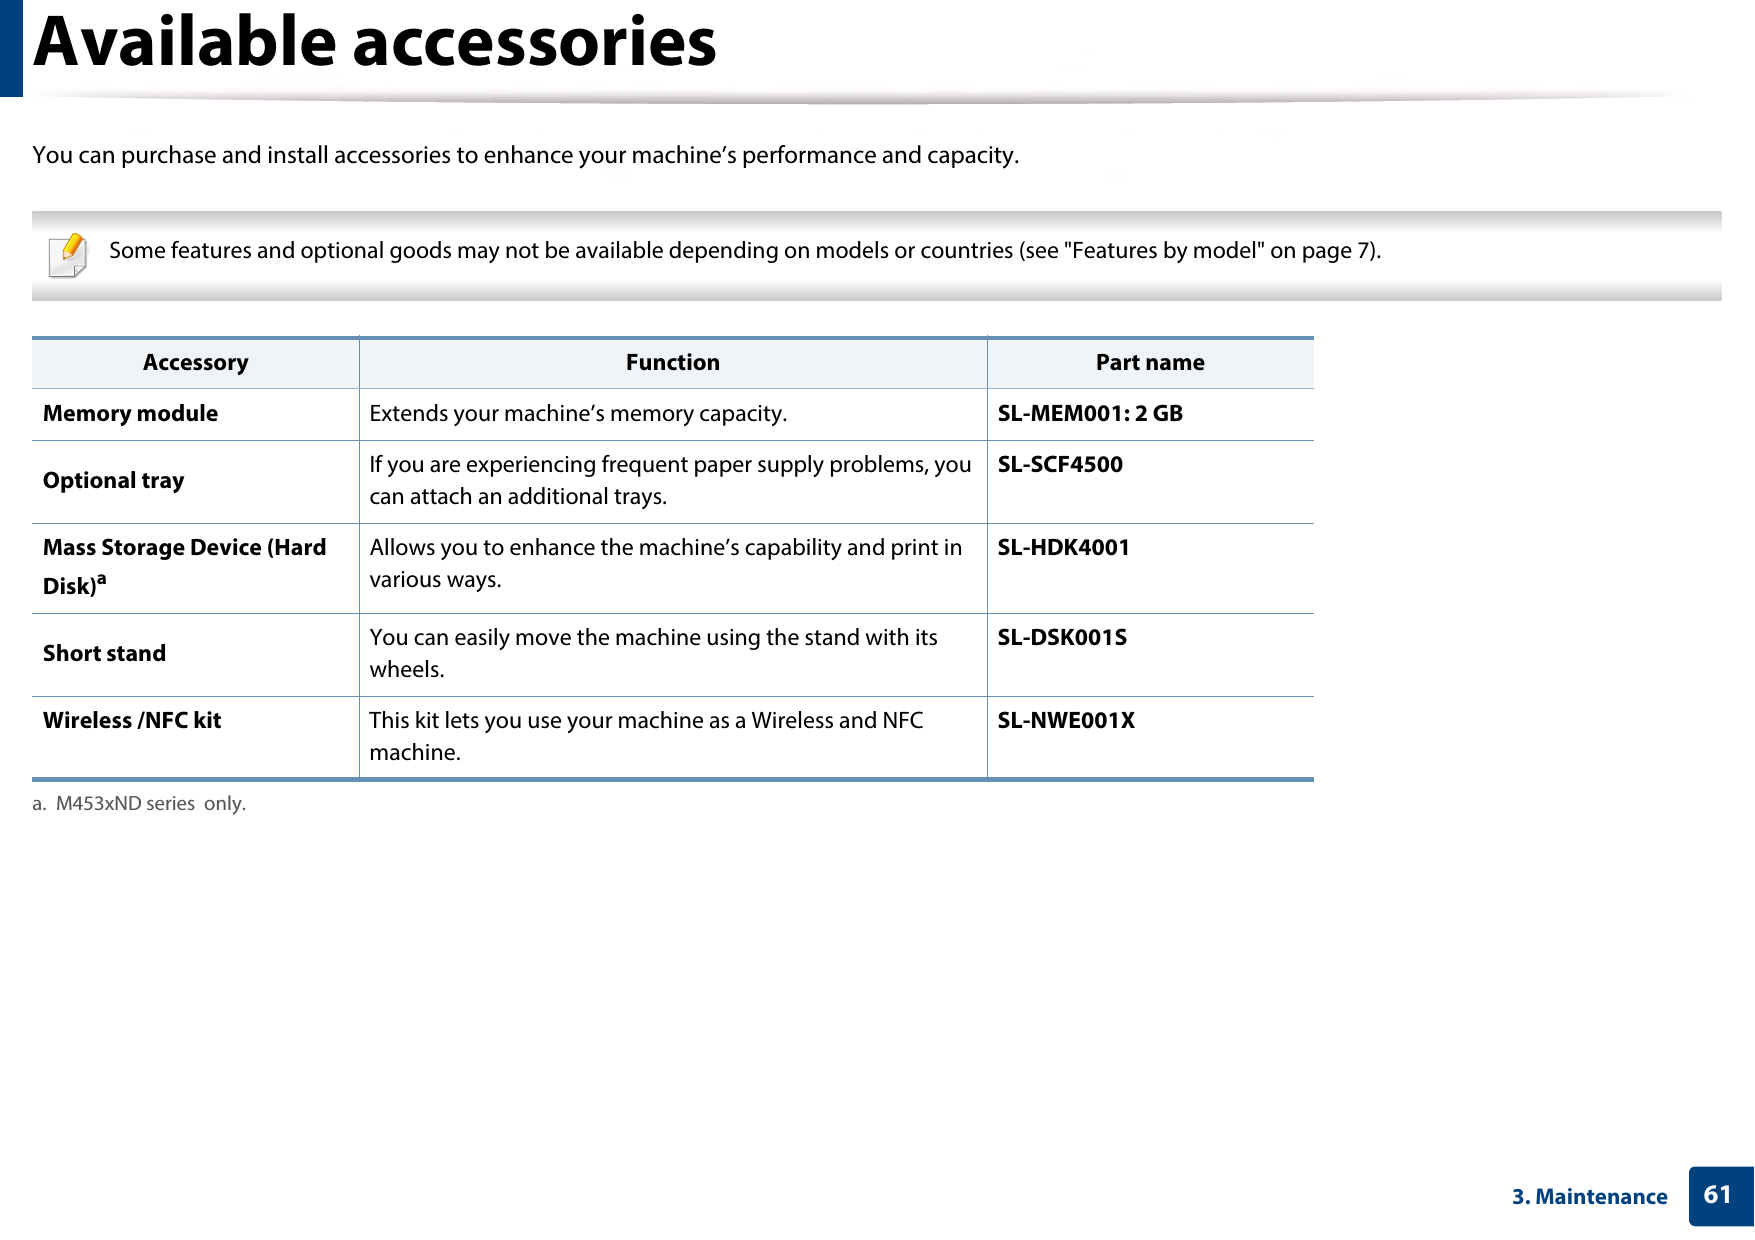 613. MaintenanceAvailable accessoriesYou can purchase and install accessories to enhance your machine’s performance and capacity. Some features and optional goods may not be available depending on models or countries (see &quot;Features by model&quot; on page 7).   Accessory Function Part nameMemory module Extends your machine’s memory capacity. SL-MEM001: 2 GBOptional tray If you are experiencing frequent paper supply problems, you can attach an additional trays.SL-SCF4500Mass Storage Device (Hard Disk)aa. M453xND series  only.Allows you to enhance the machine’s capability and print in various ways.SL-HDK4001Short stand You can easily move the machine using the stand with its wheels.SL-DSK001SWireless /NFC kit This kit lets you use your machine as a Wireless and NFC machine.SL-NWE001X